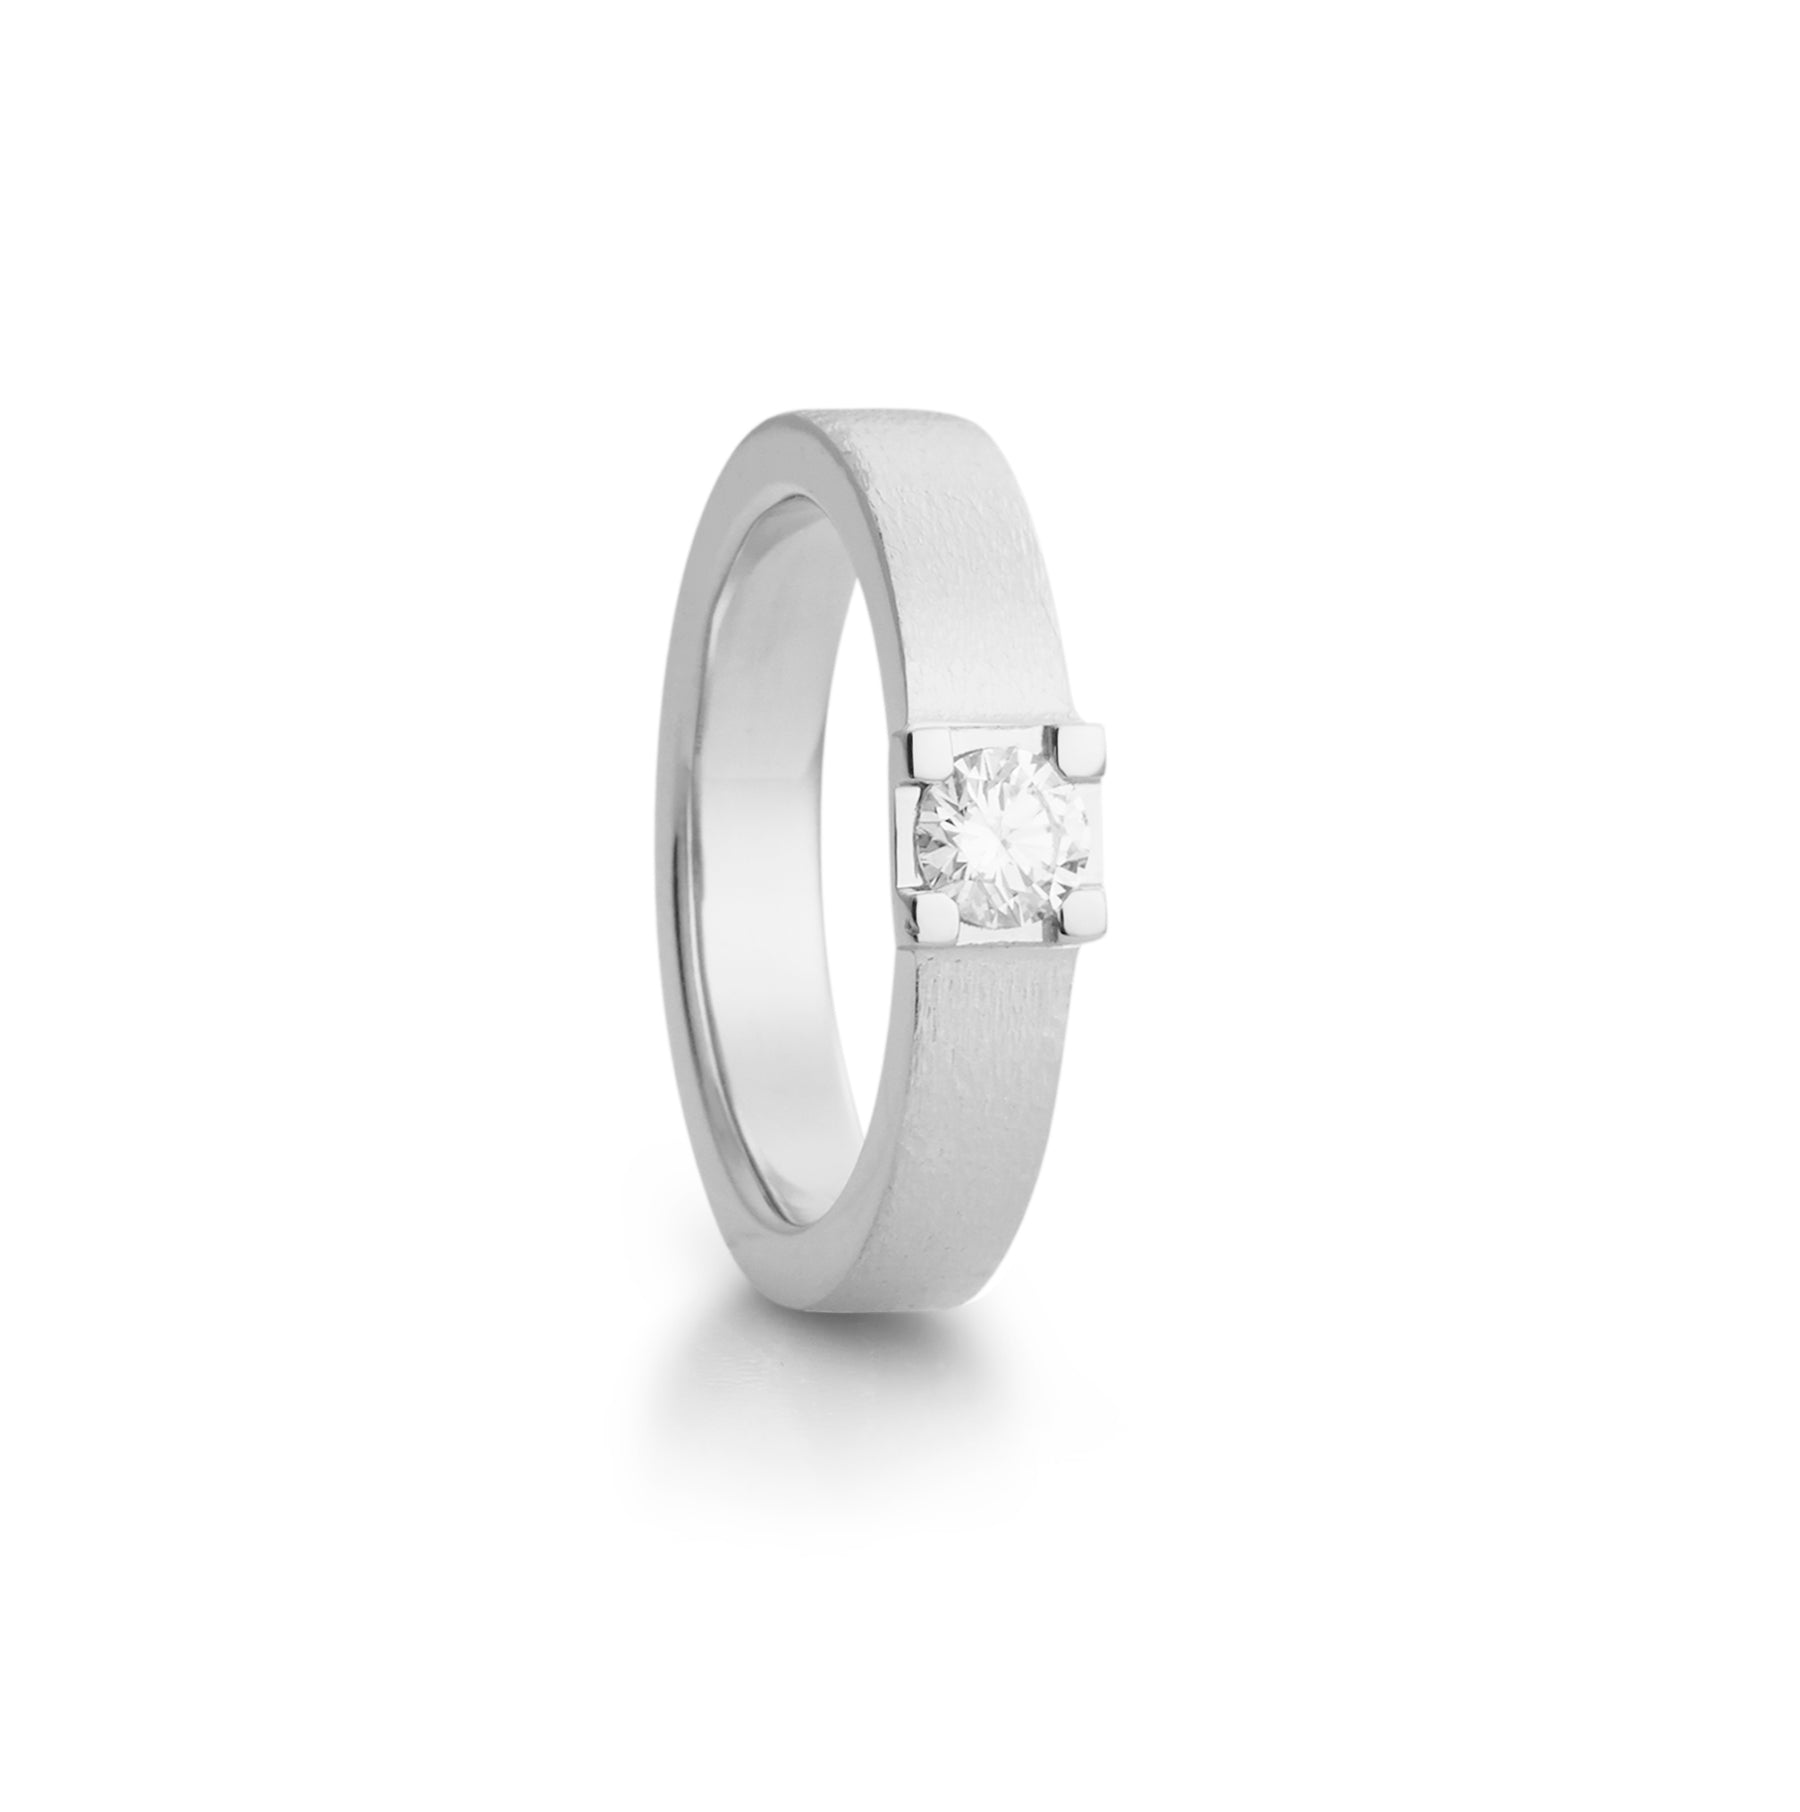 Magnificent ring in white gold with diamond